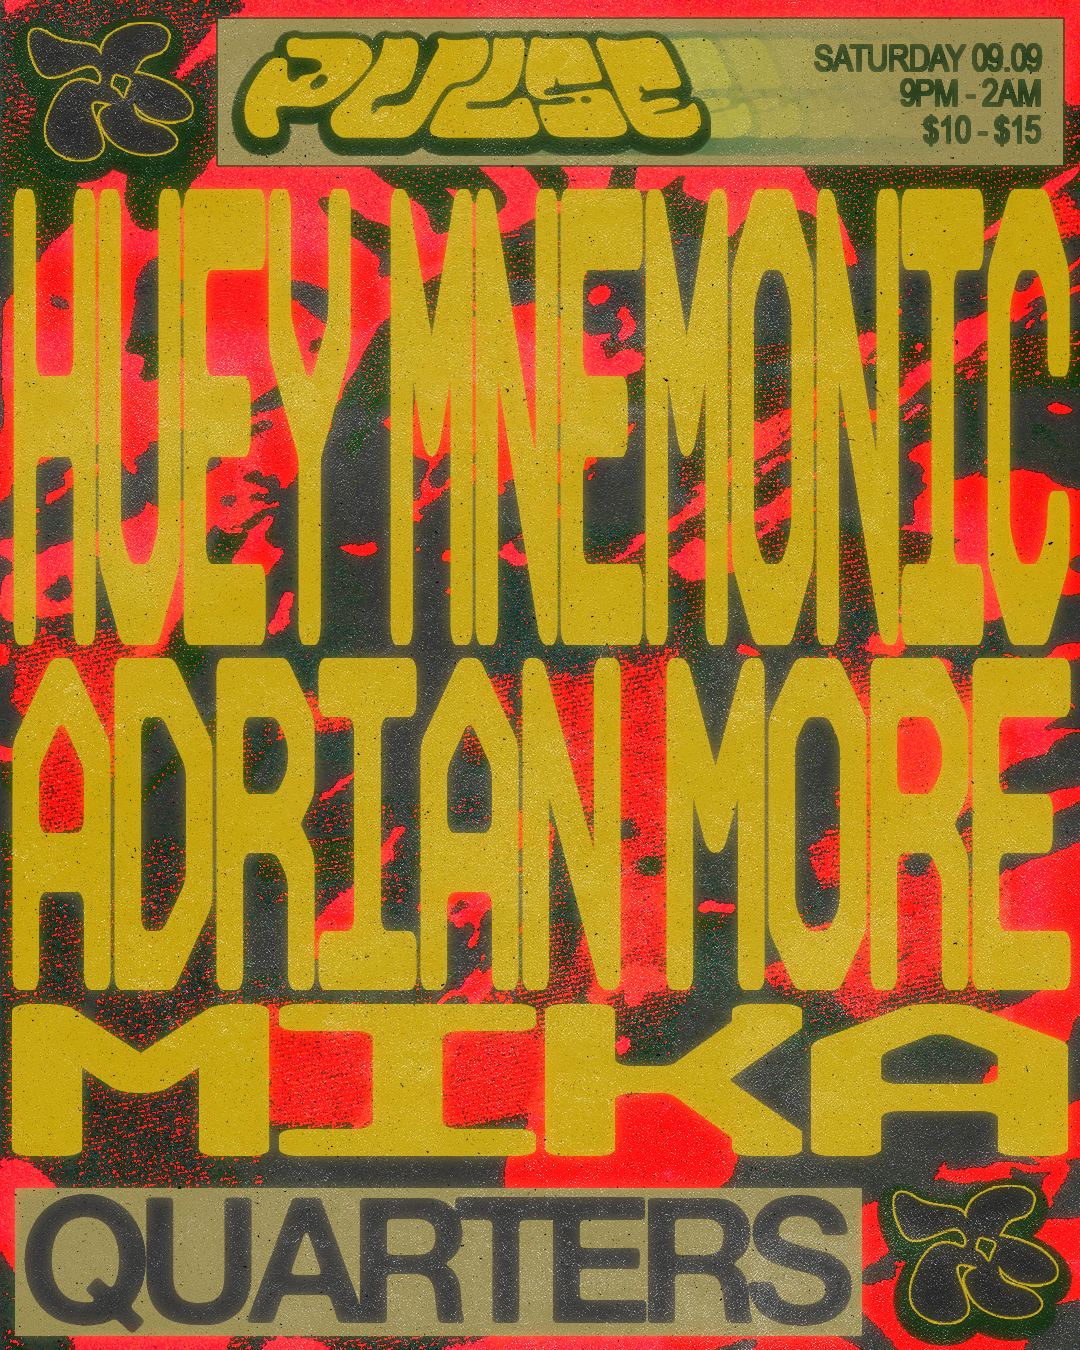 PULSE with Huey Mnemonic / Adrian More / Mika - フライヤー表